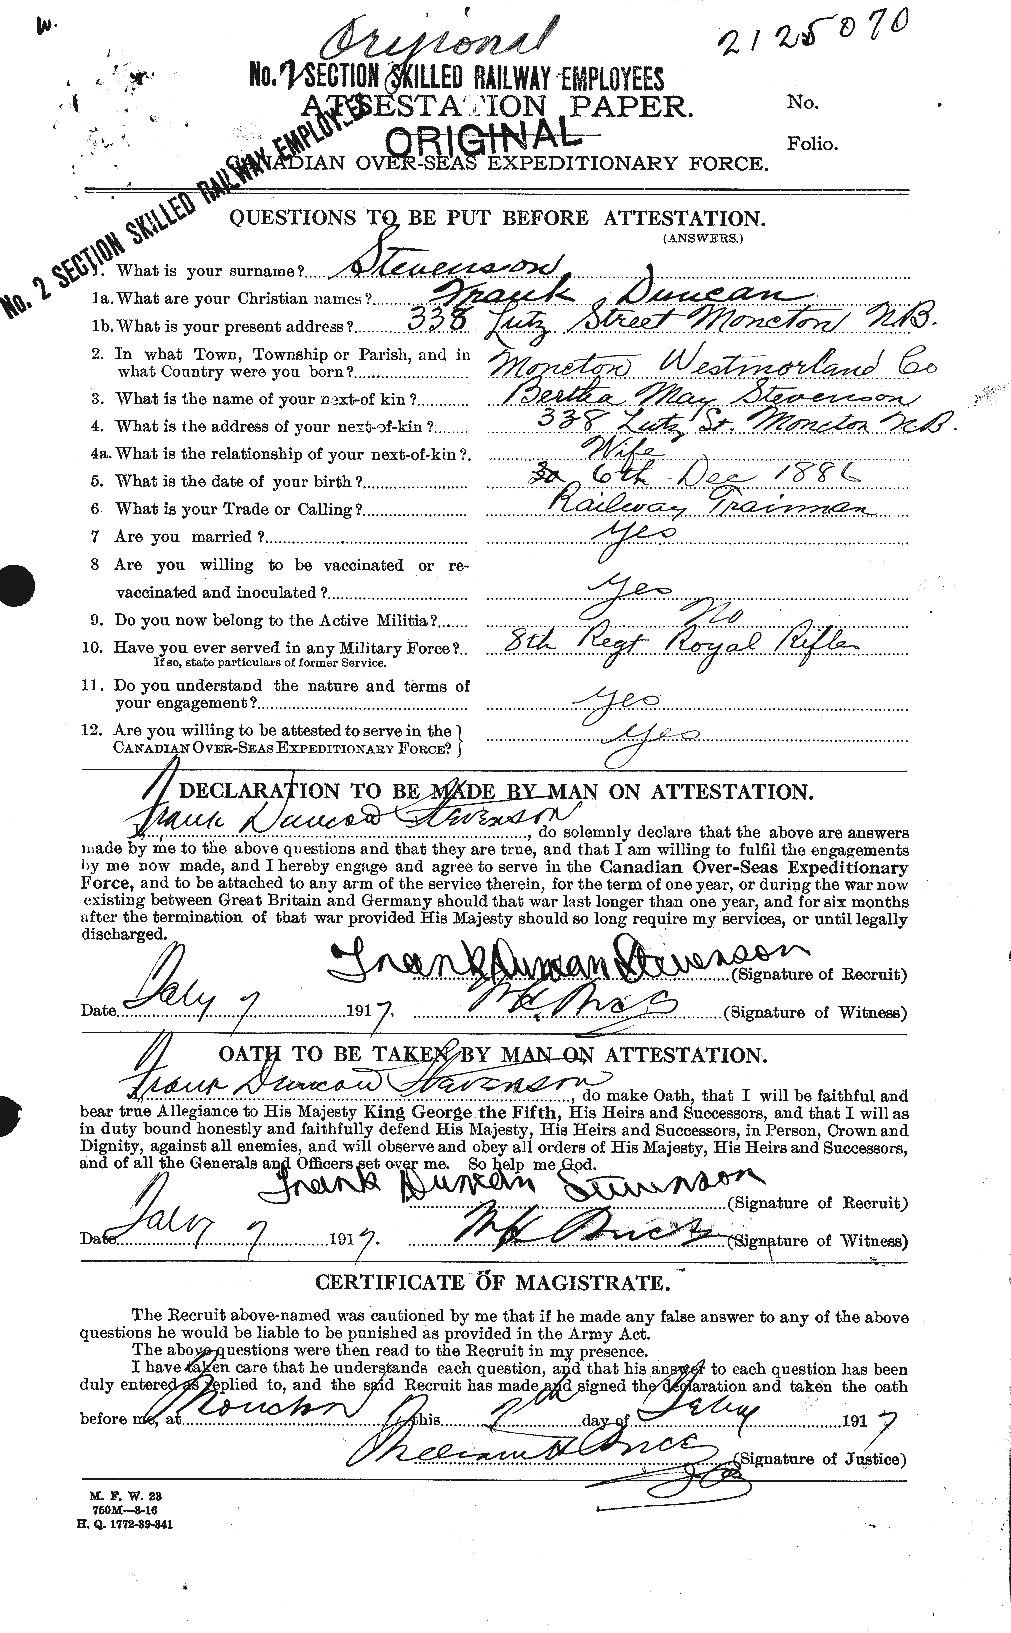 Personnel Records of the First World War - CEF 119117a